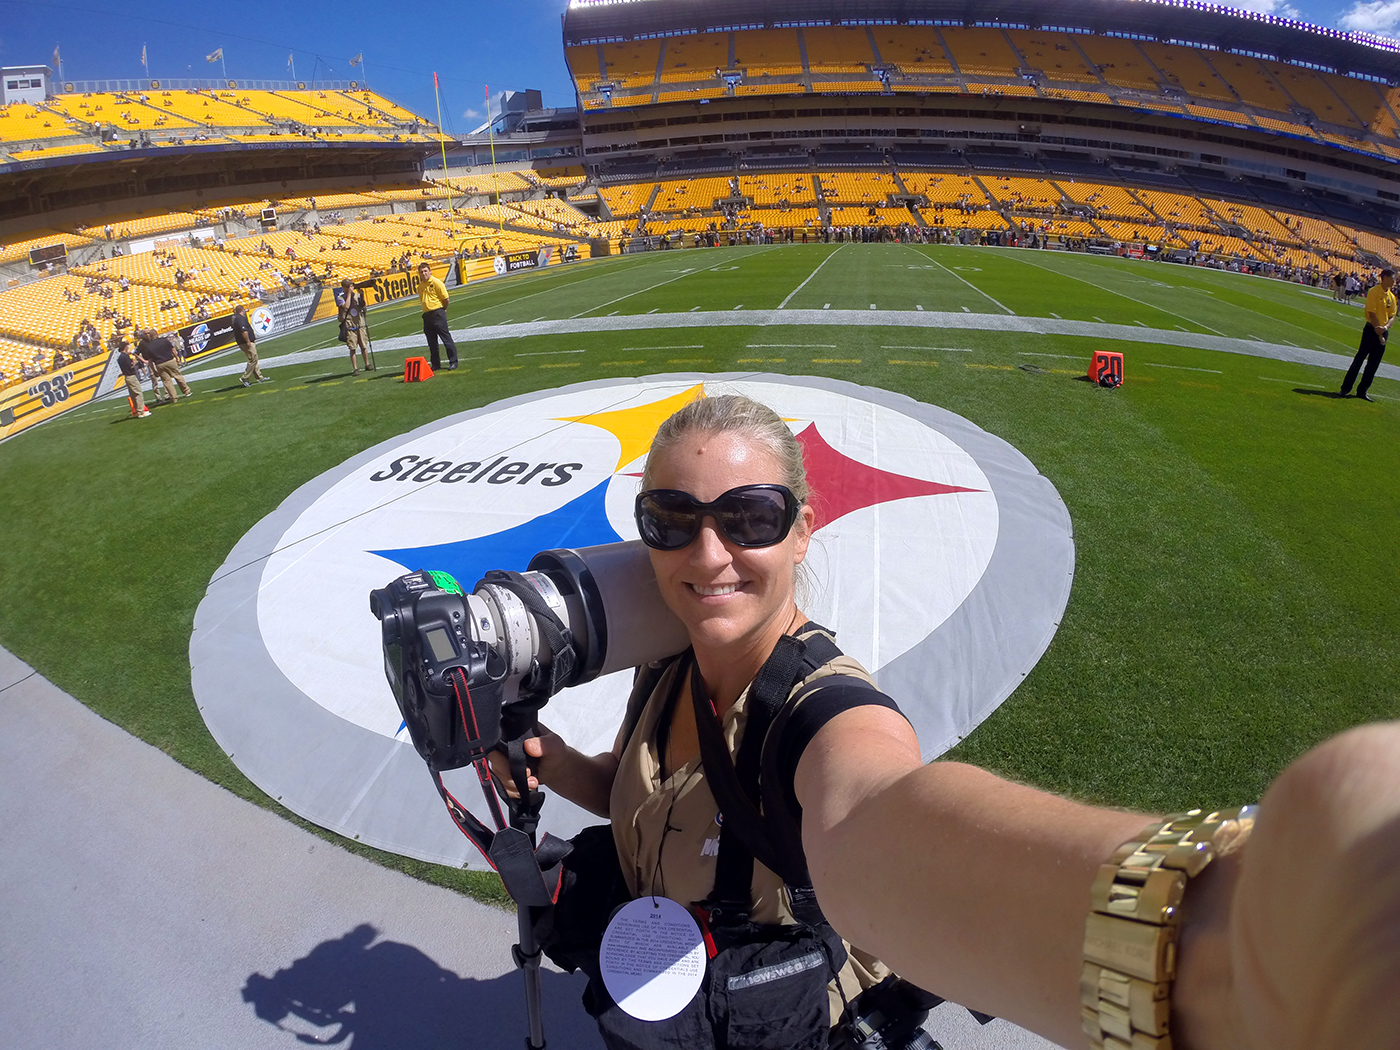 Getting ready to shoot the Steelers home opener against the Browns at Heinz Stadium in Pittsburgh, PA Sunday, Septemebr 7, 2014